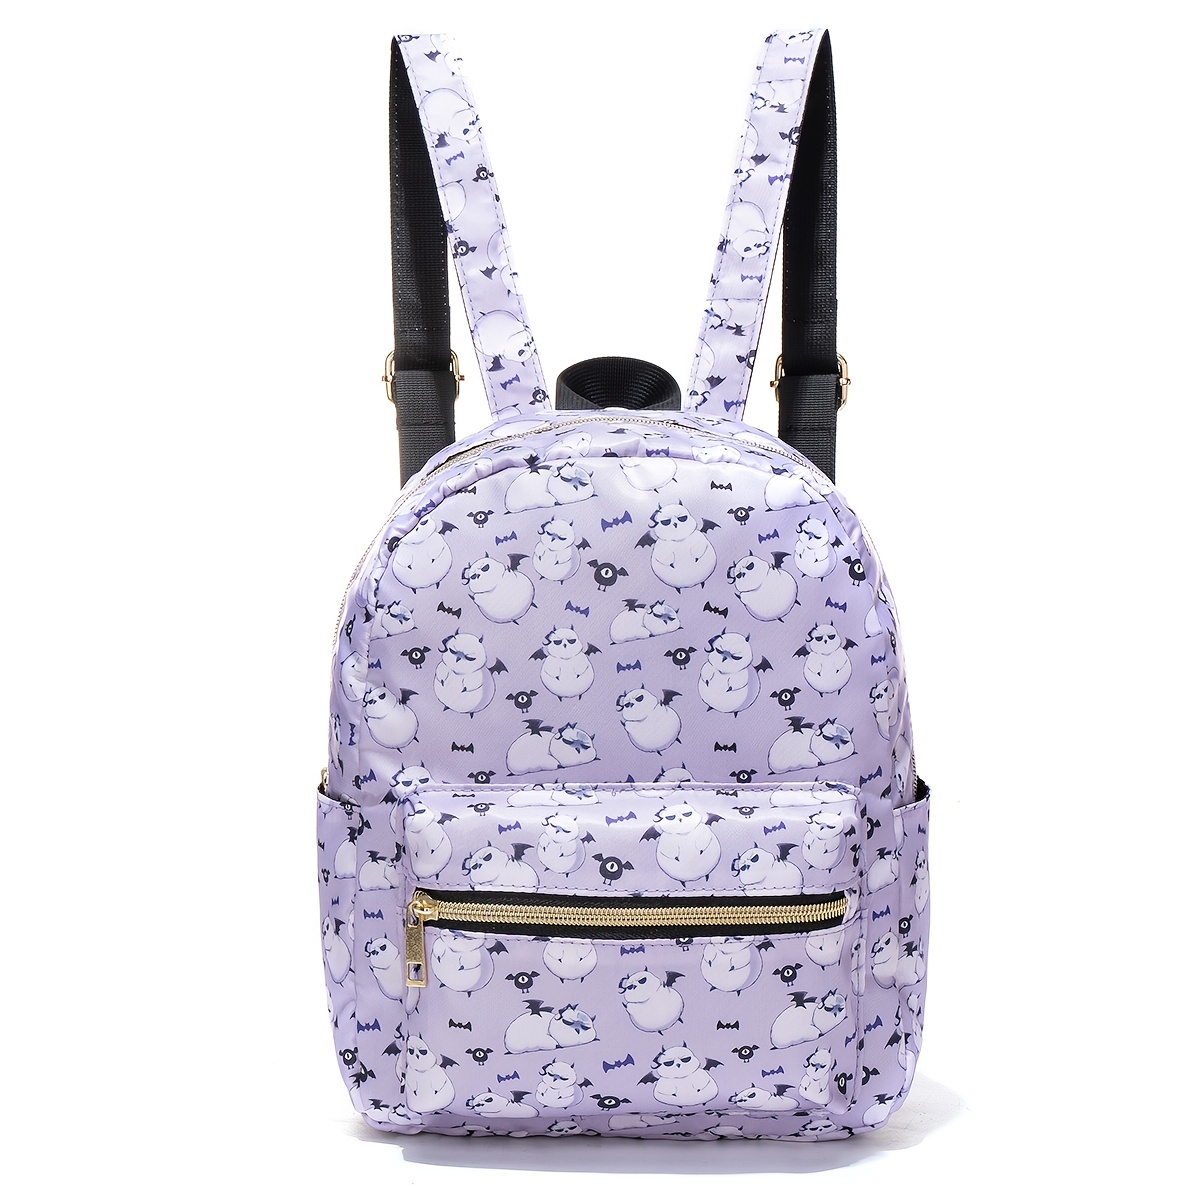 All Over Print Flap Backpack White Fashionable For Daily School Bag Bookbag  For School Portable,Lightweight